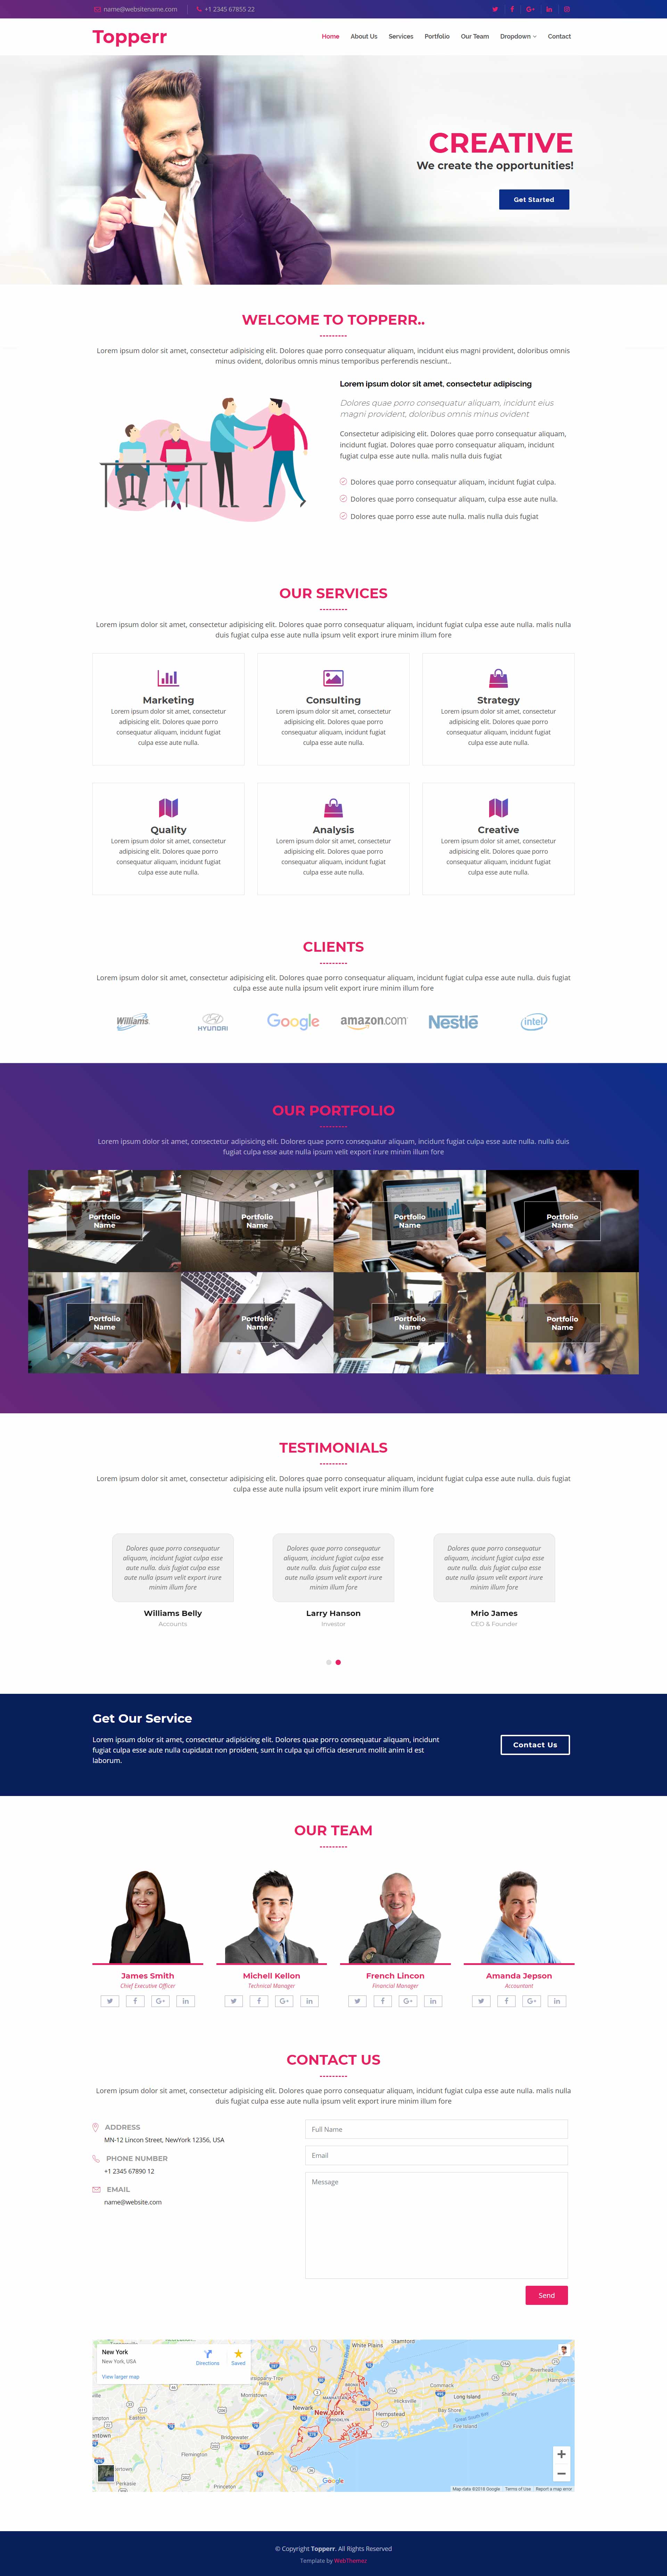 Bootstrap 4 free website template